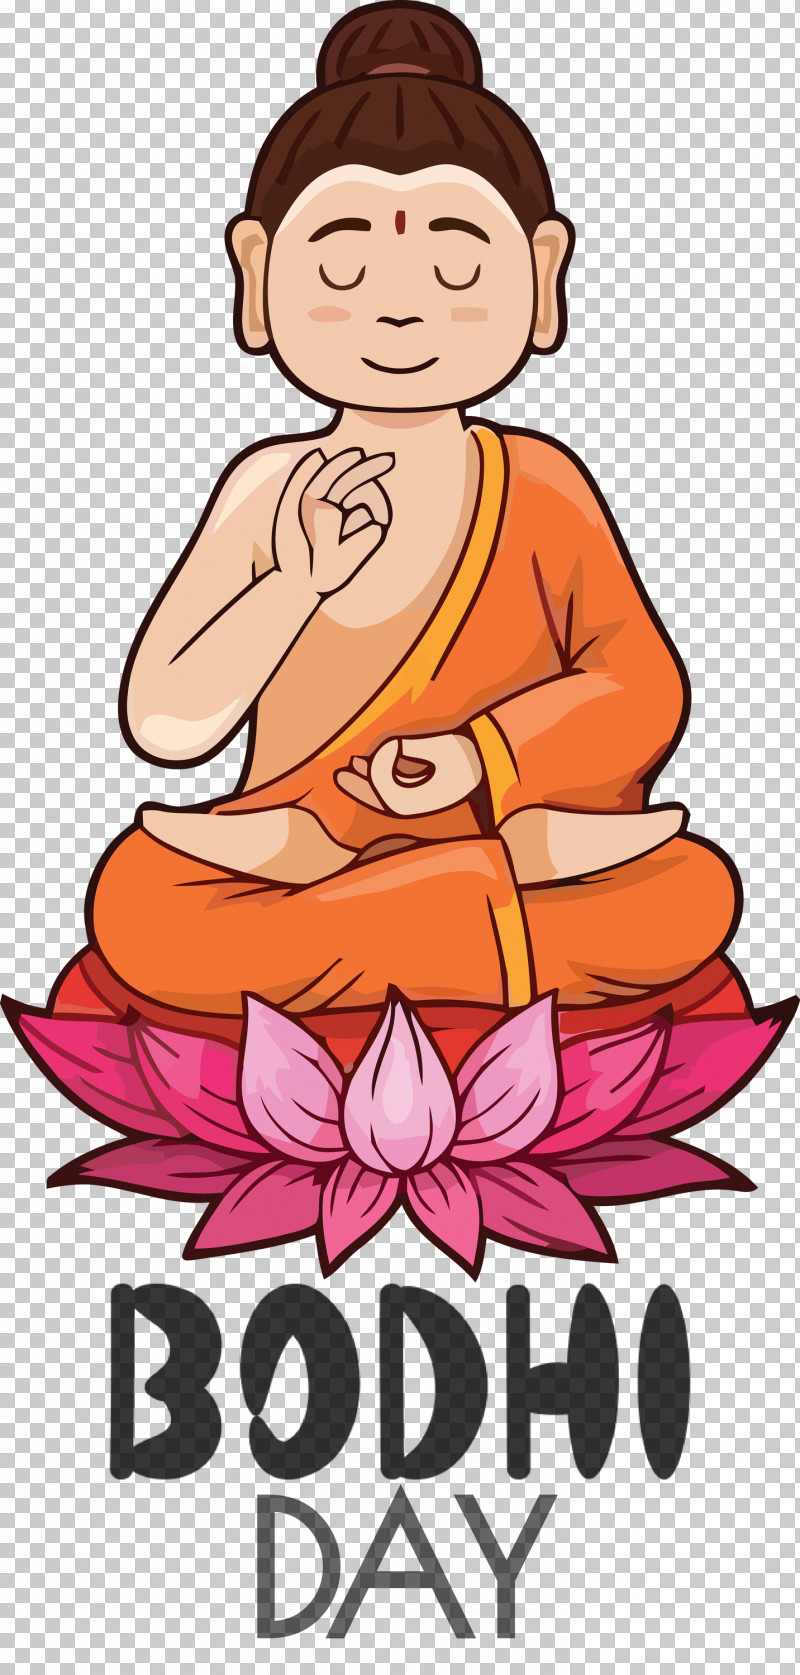 Bodhi Day Bodhi PNG, Clipart, Belief, Bodhi, Bodhi Day, Borobudur Temple, Buddhas Birthday Free PNG Download